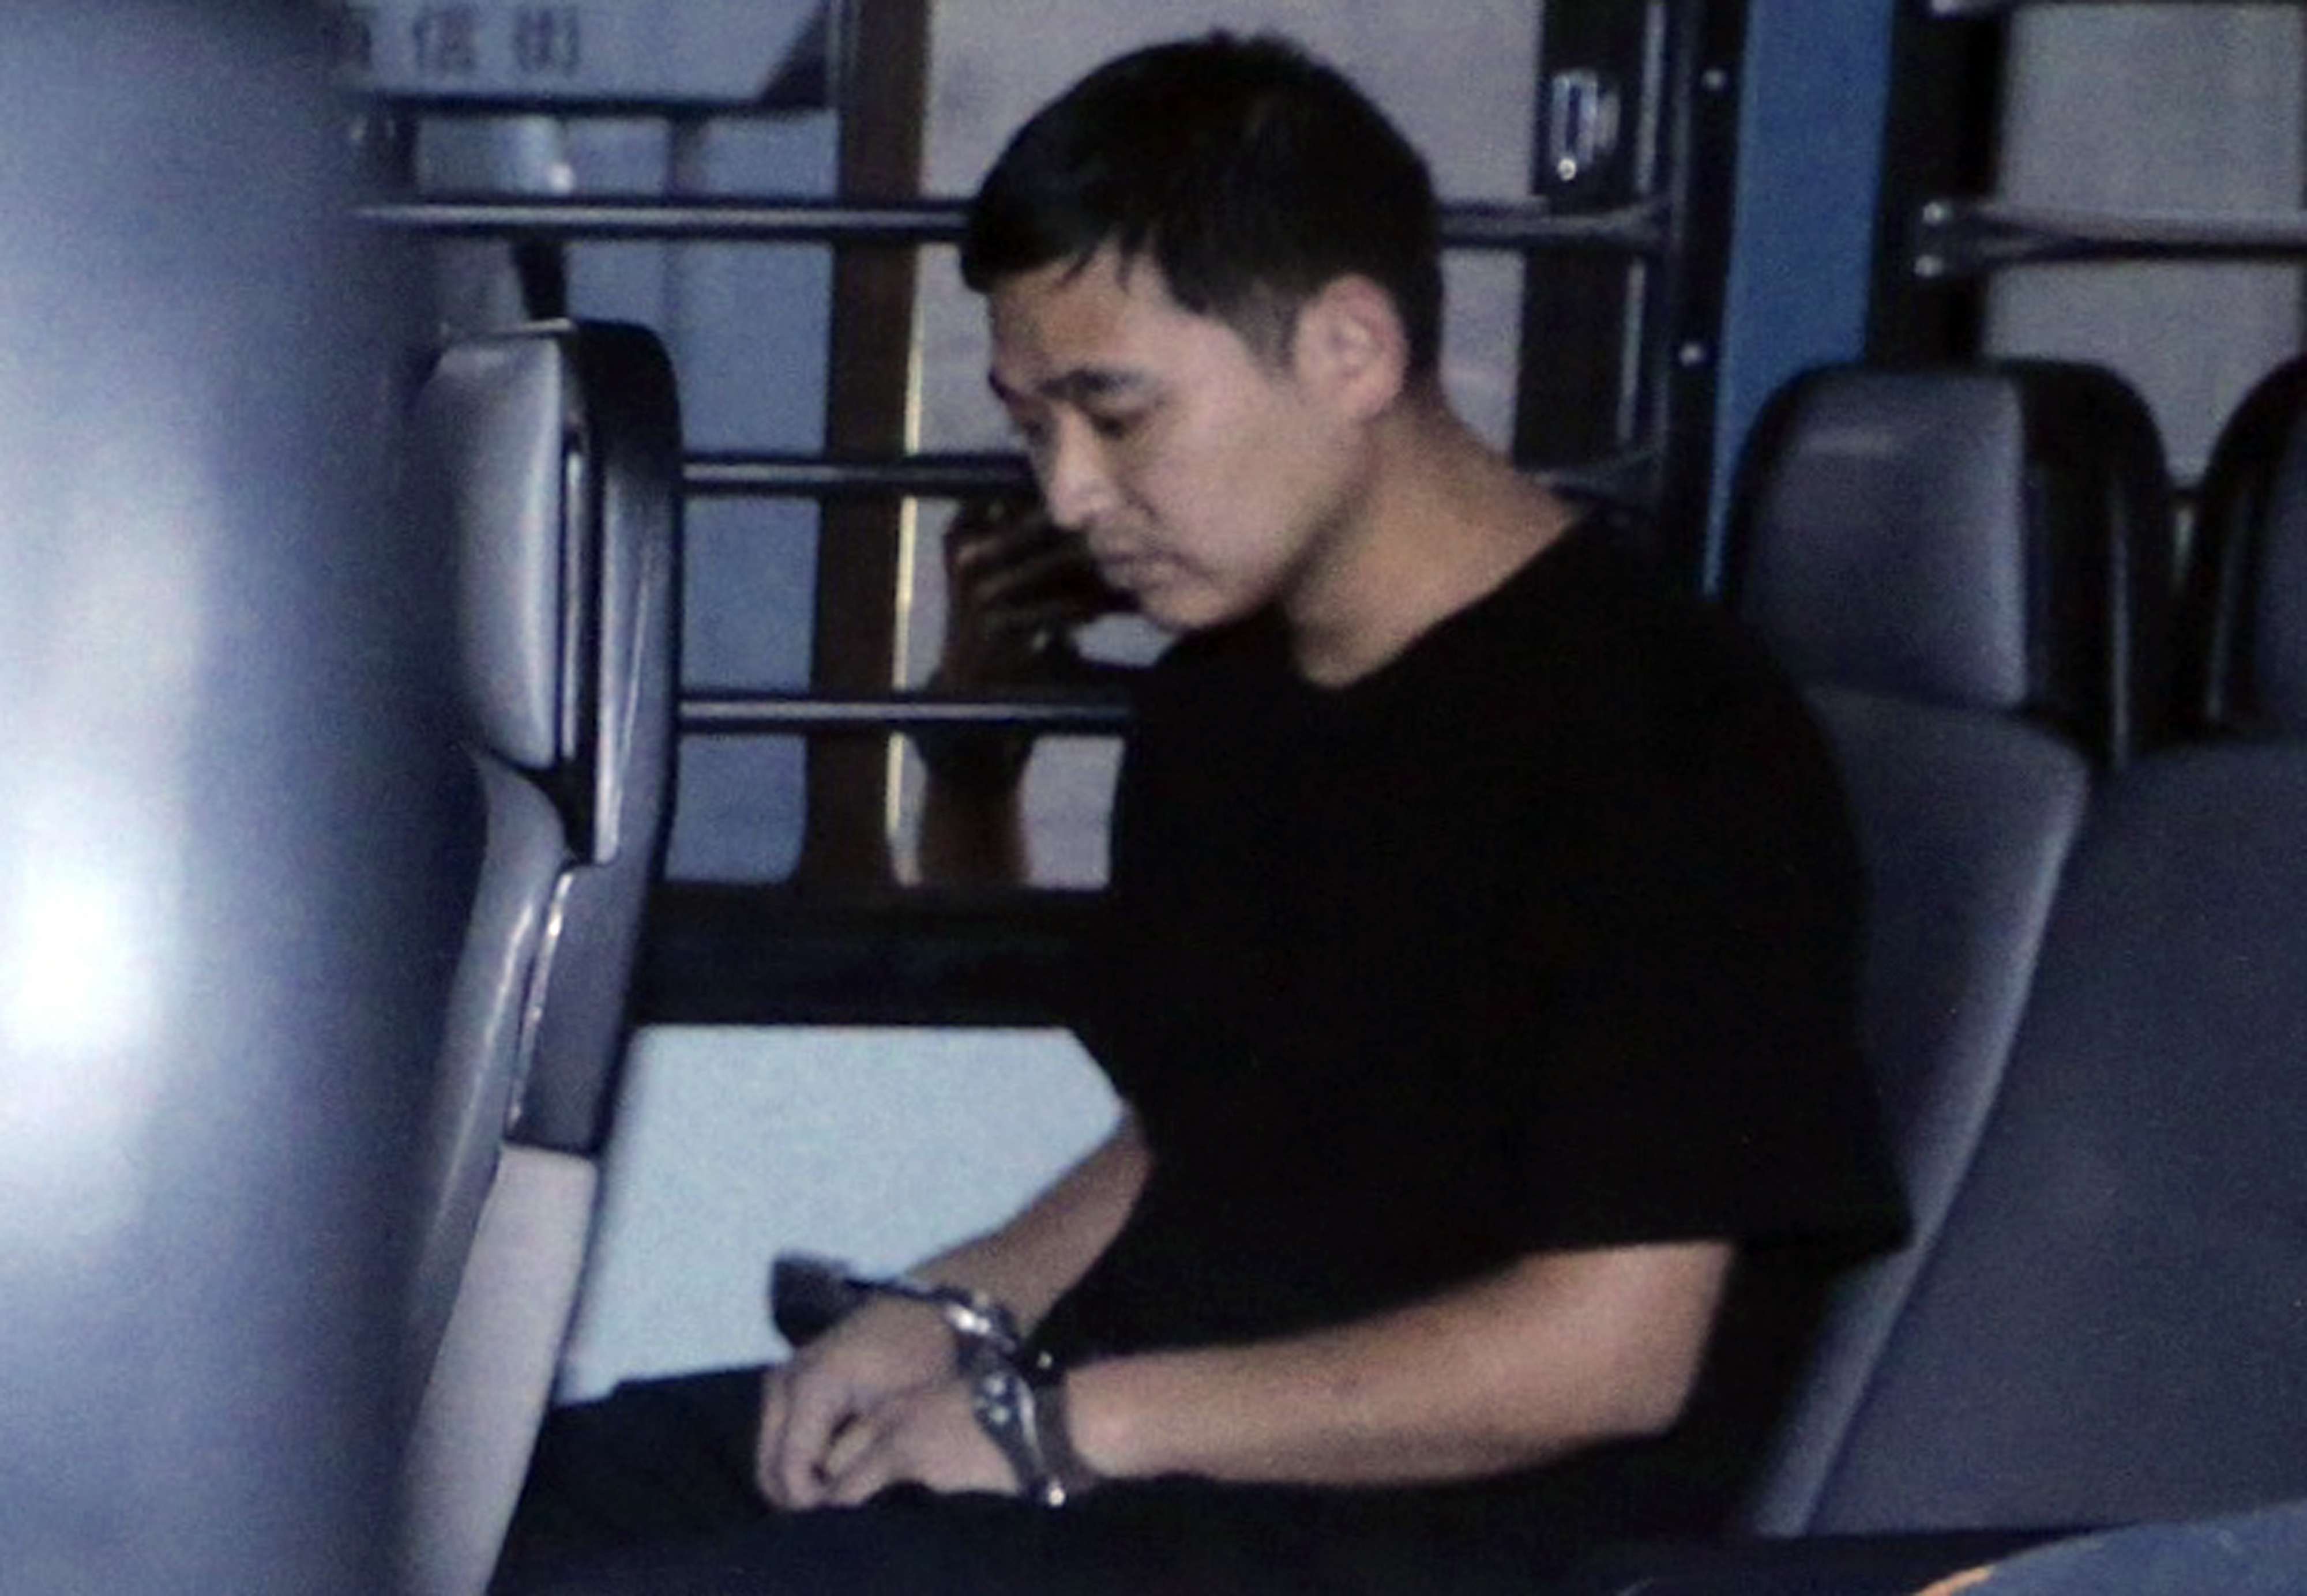 Zheng Xingwang is escorted away by Correctional Services Department staff after his second appearance in Kwun Tong Court in May 2015. Photo: David Wong